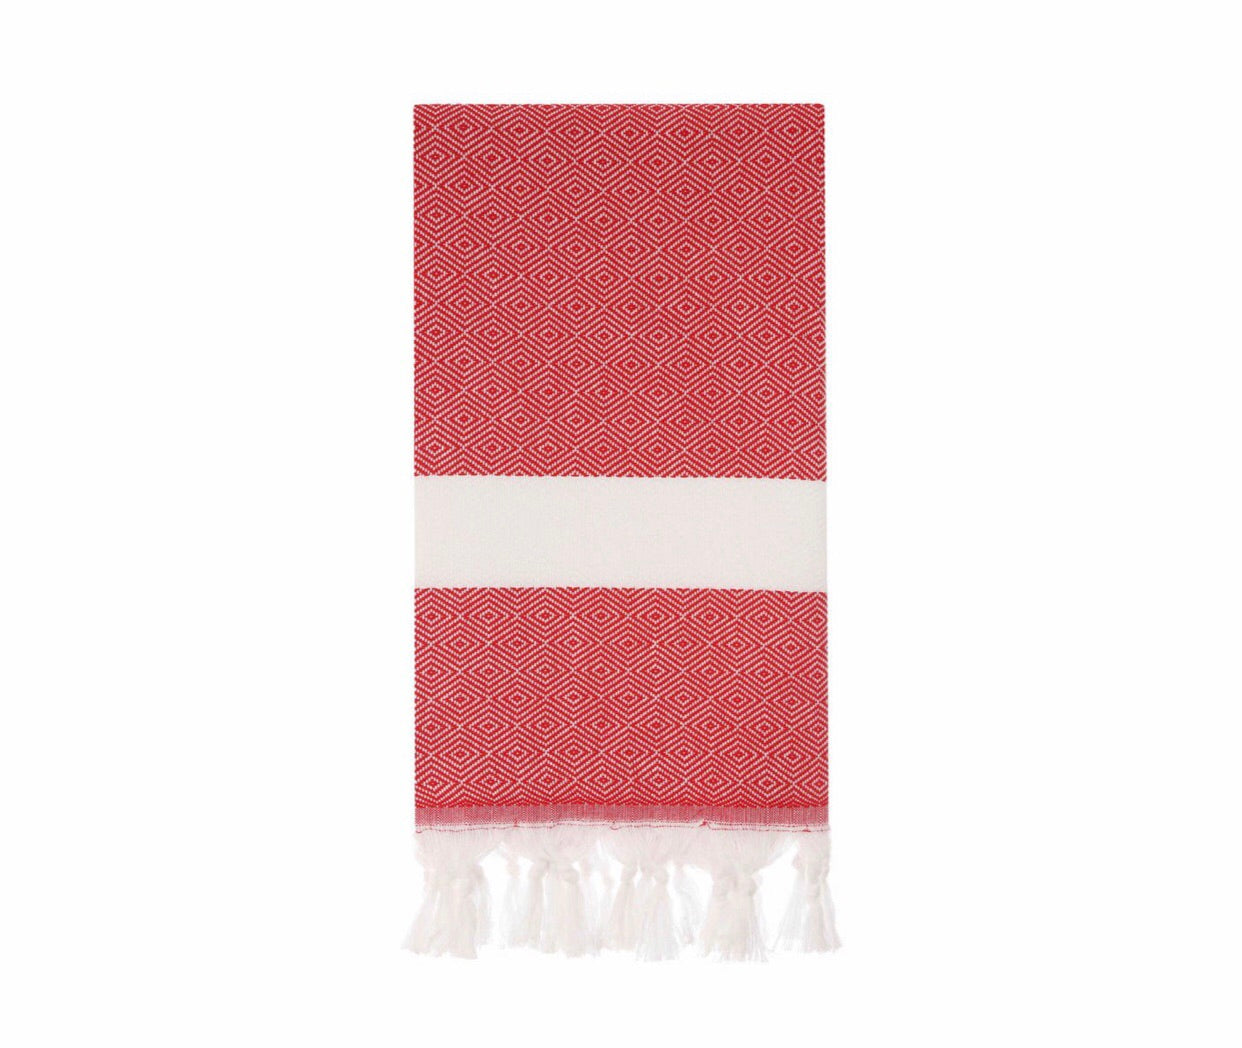 Diamond pattern Turkish towel for beach or bath in red